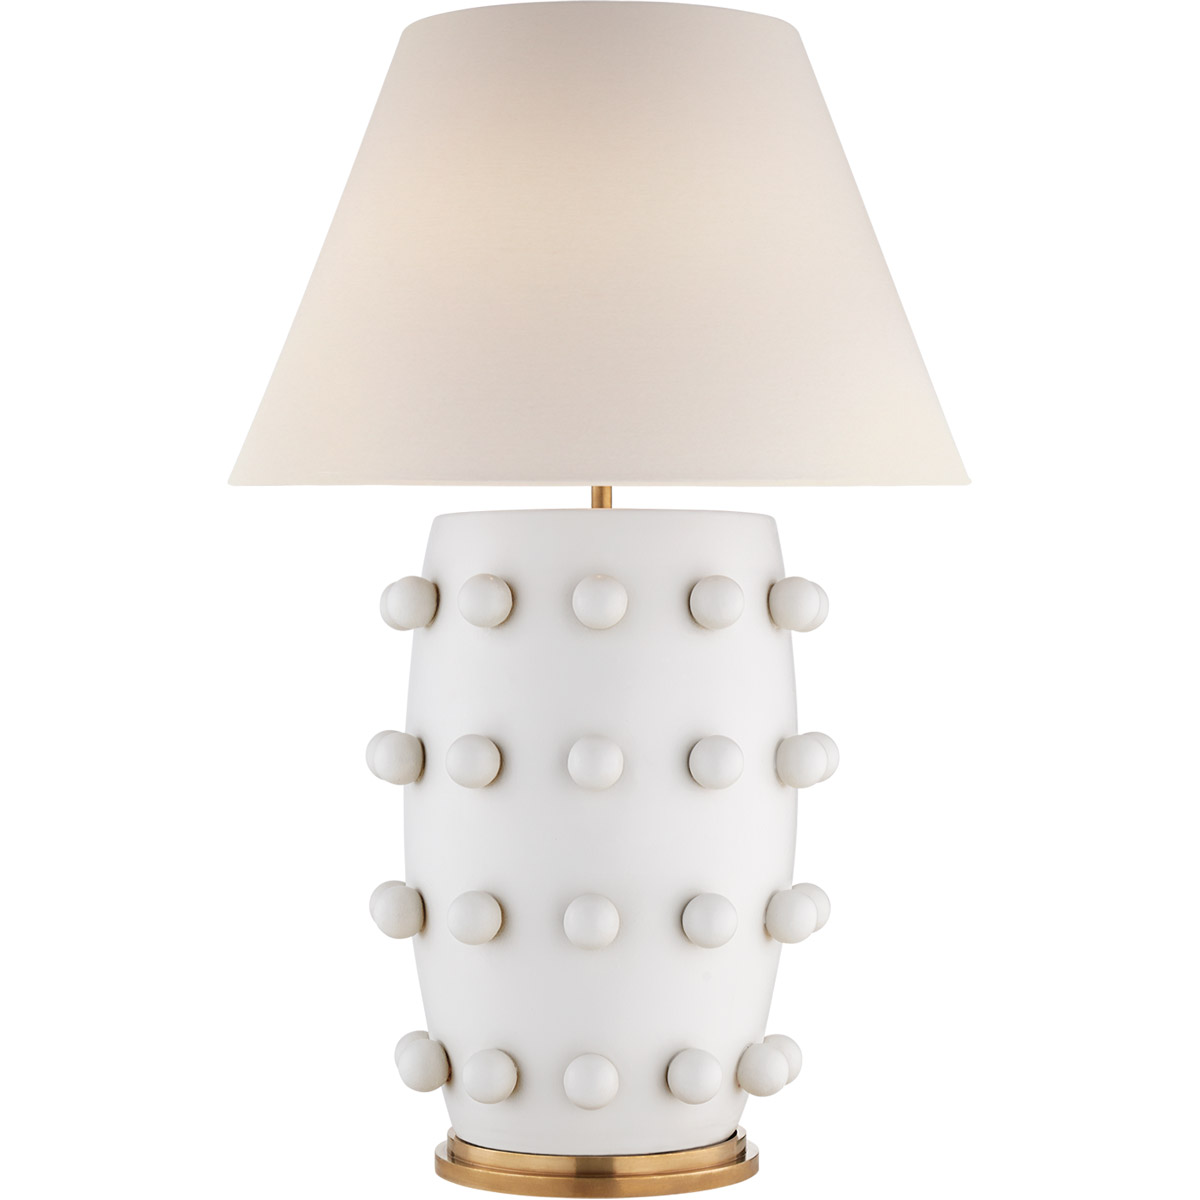 Visual Comfort Linden Table Lamp, Plaster White